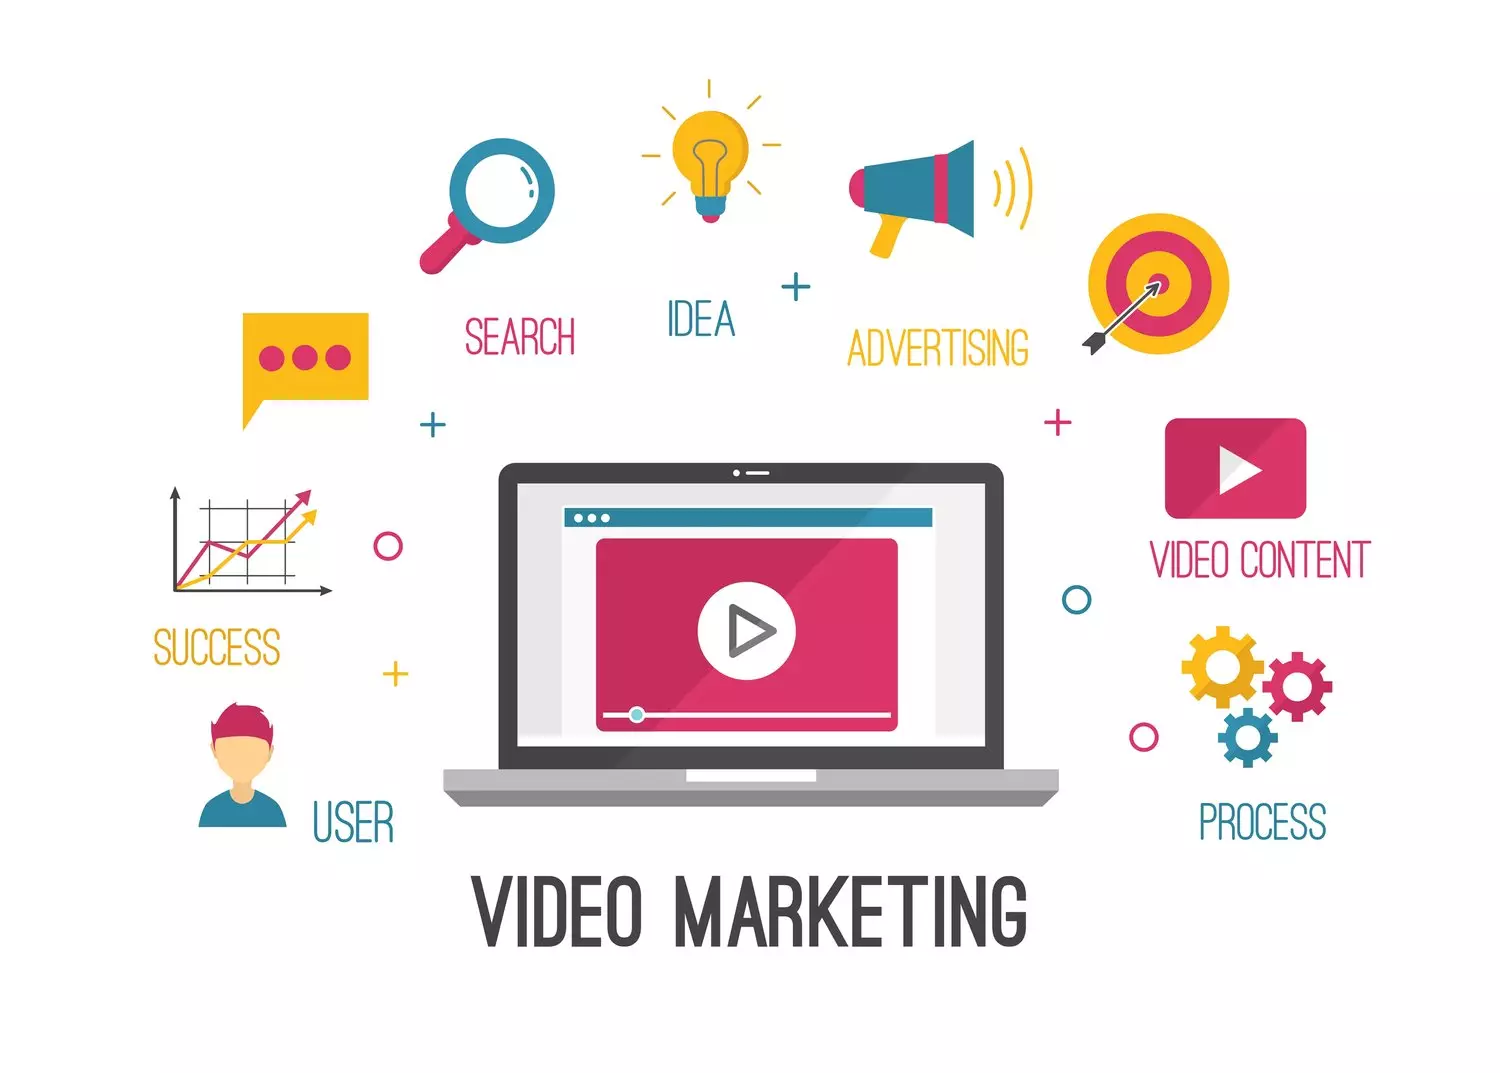 Key components of video marketing